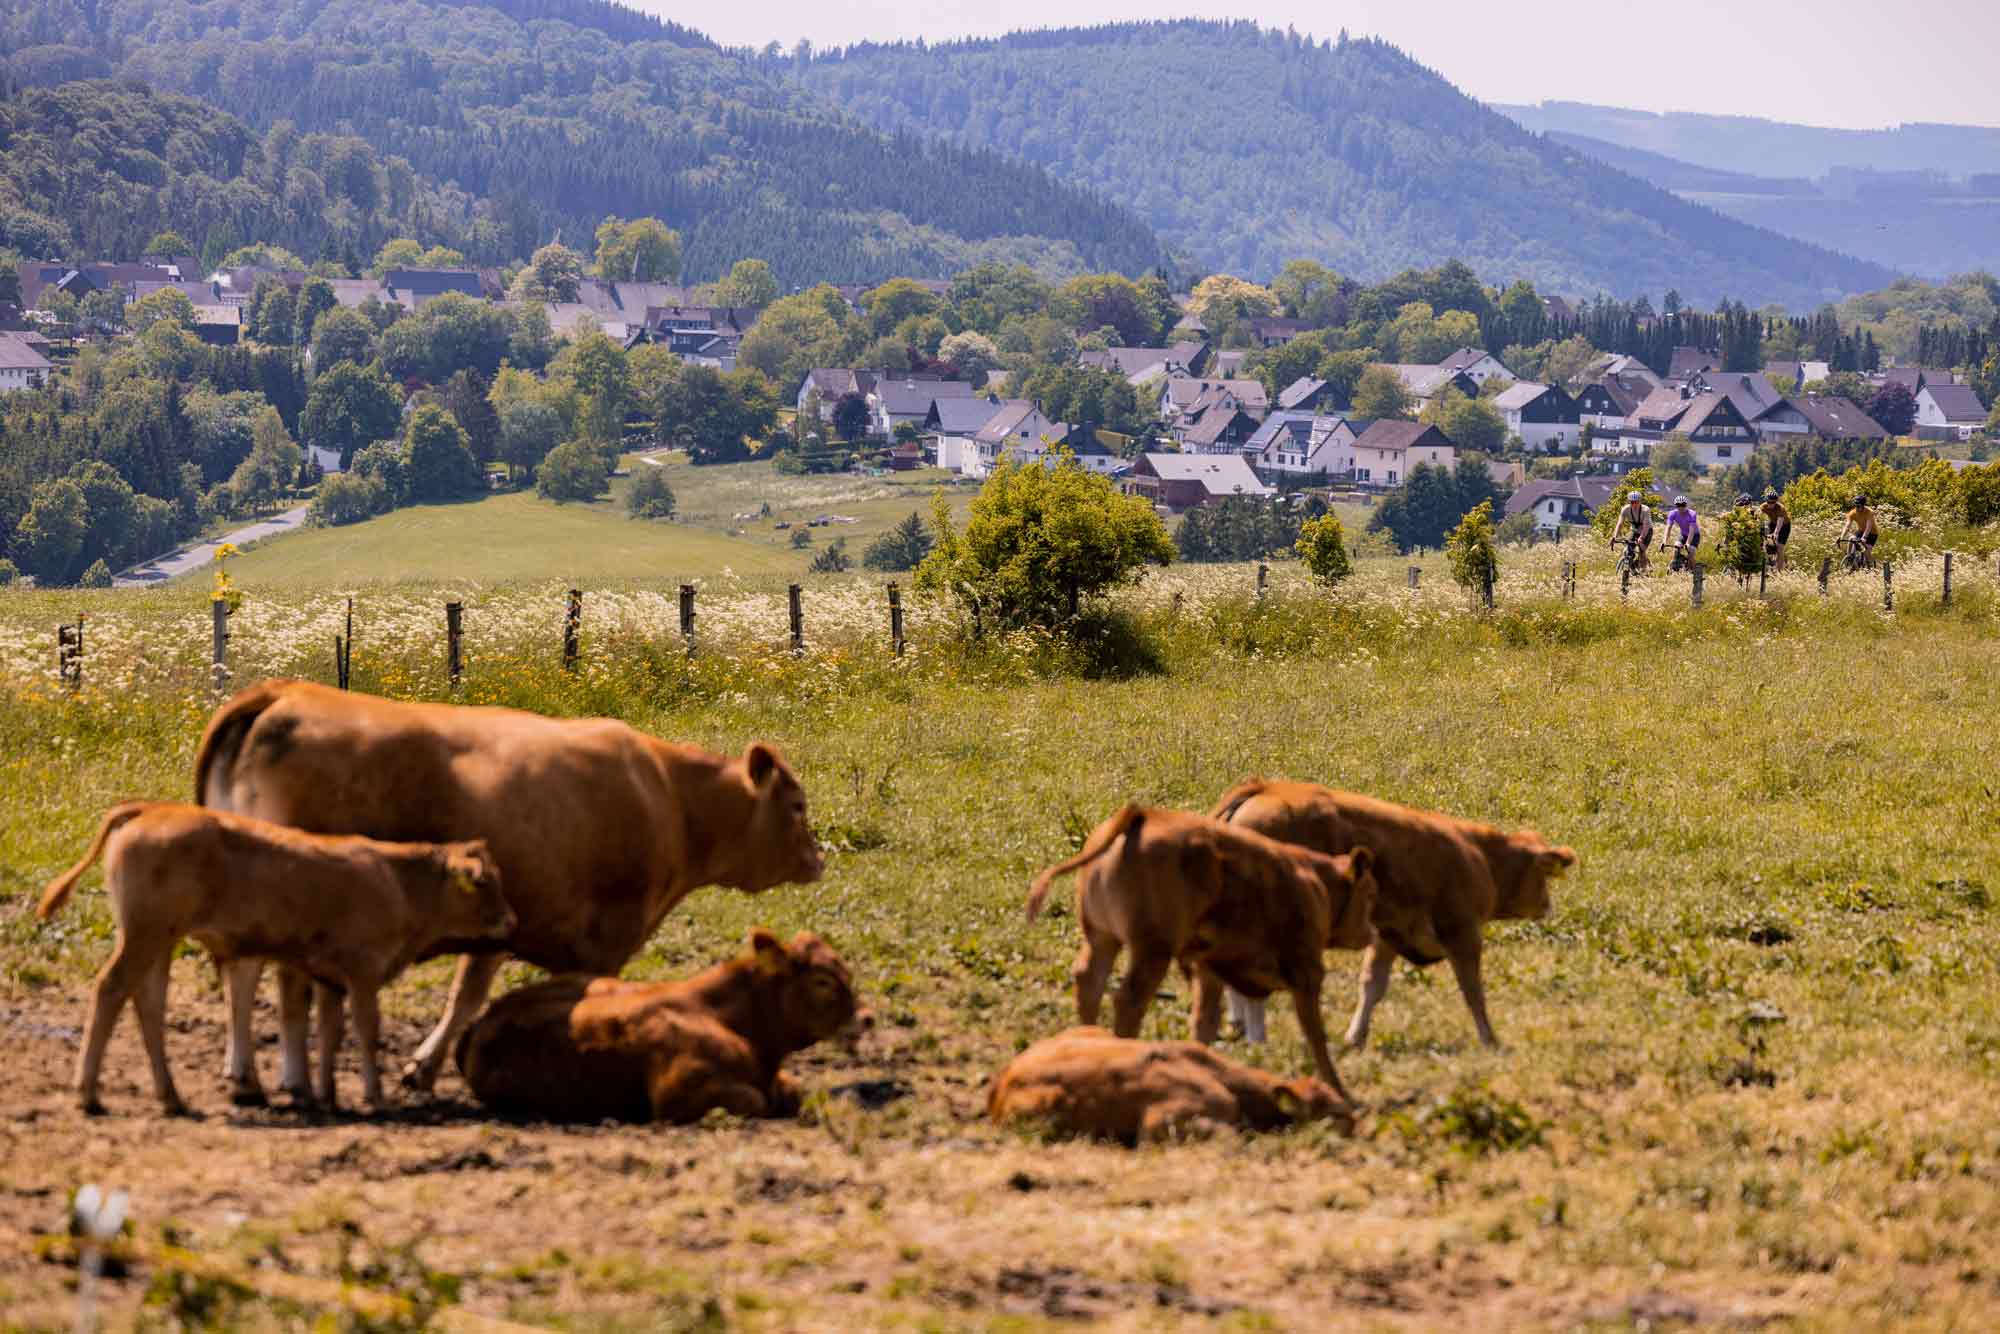 Gravel biking in the sauerland - even the cows think it's great!